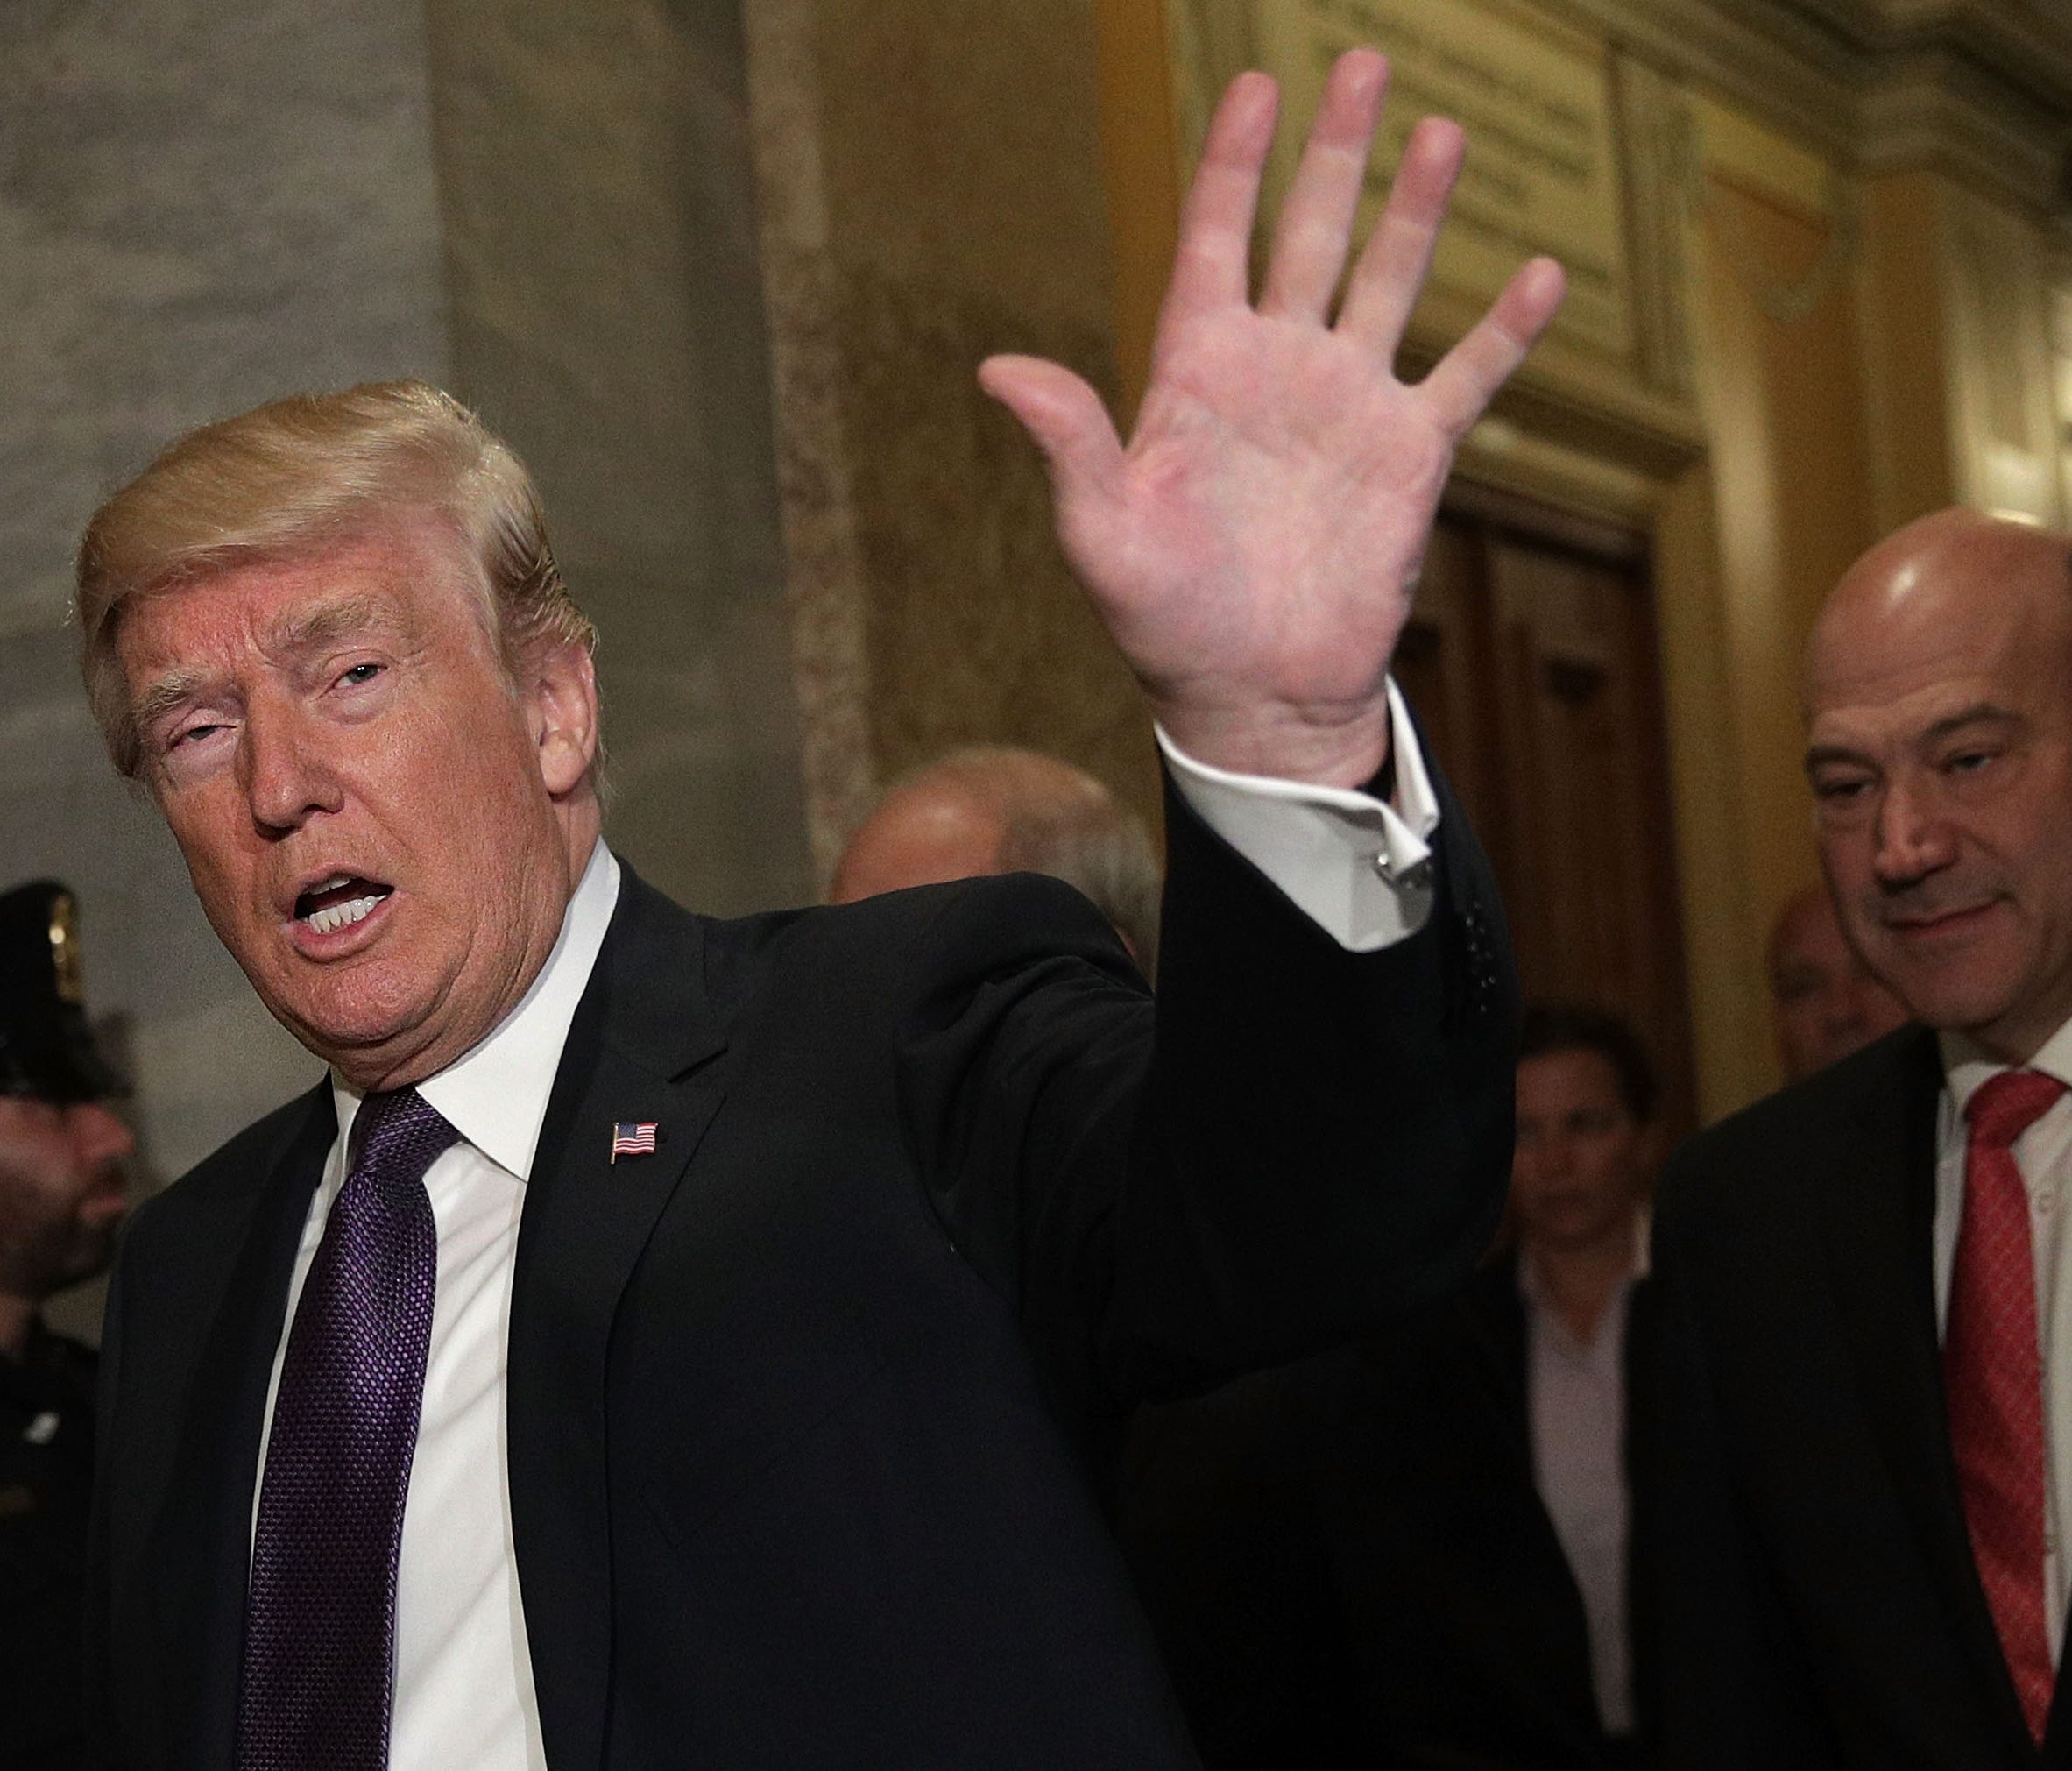 President Trump waves as he arrives for a House Republican Conference meeting in Washington D.C.